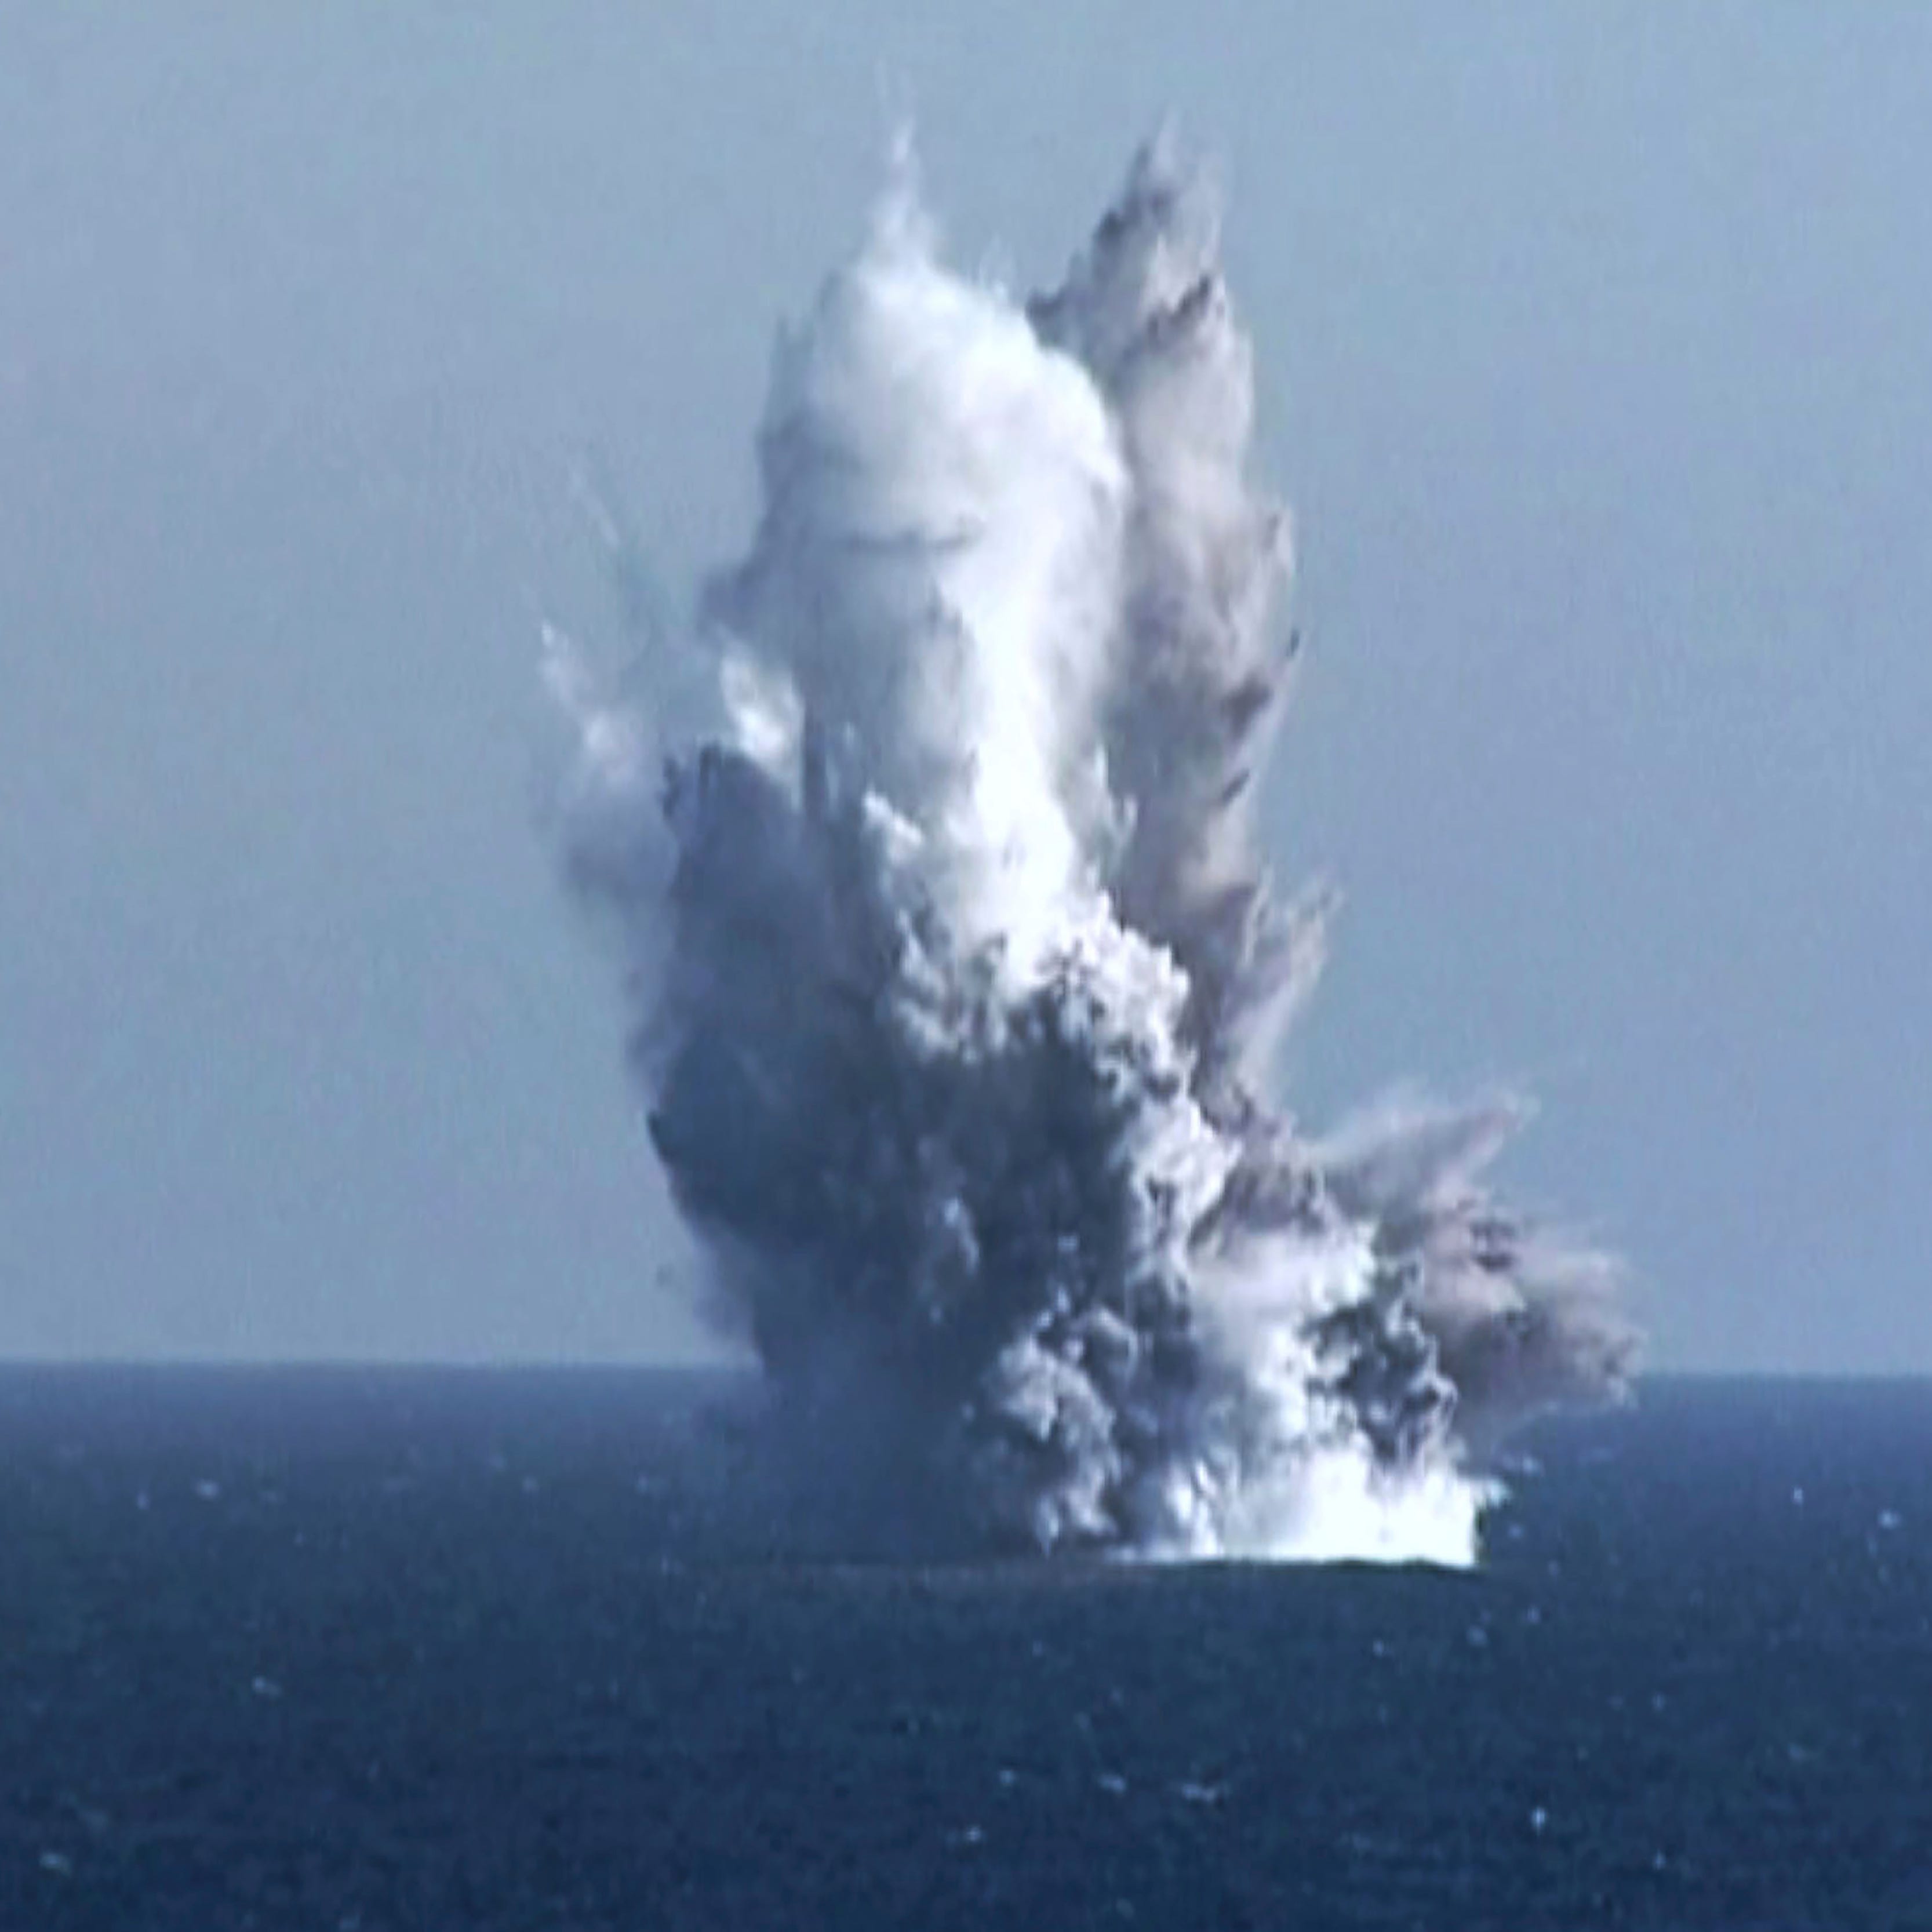 This photo provided by the North Korean government, shows what it says is an underwater blast of test warhead loaded to an unmanned underwater nuclear attack craft "Haeil" during an exercise around Hongwon Bay in waters off North Korea's eastern coast Thursday, March 23, 2023. Independent journalists were not given access to cover the event depicted in this image distributed by the North Korean government.